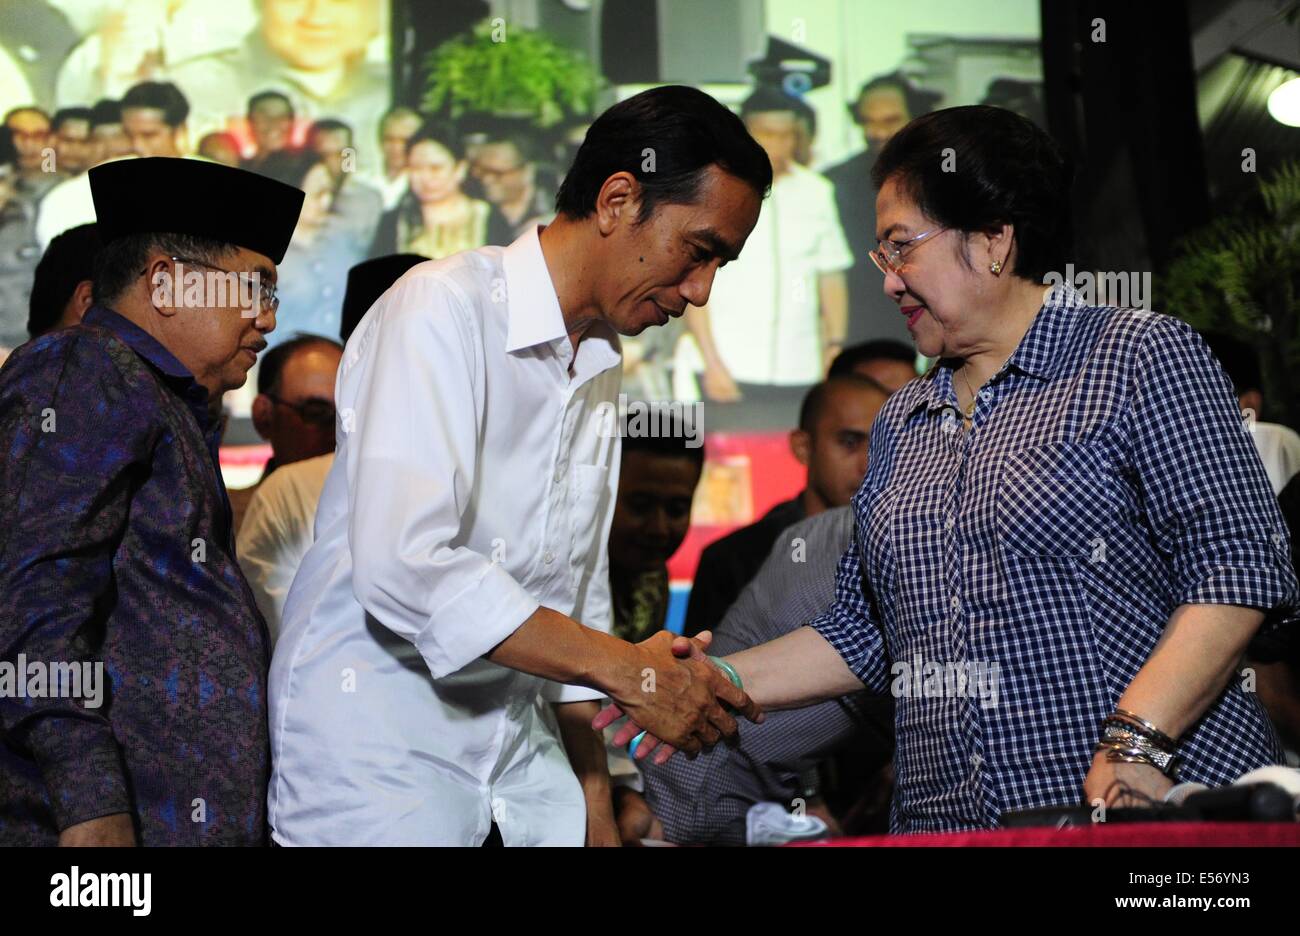 Jakarta, Indonesia. 22nd July, 2014. Indonesia's presidential candidate from the Indonesian Democratic Party of Struggle (PDIP) Joko Widodo (C) shakes hands with the party's Chairperson Megawati Soekarnoputri (R), accompanied by his running mate Jusuf Kalla (L) after a press conference ahead of announcement of recapitulation 2014 presidential election in Jakarta, Indonesia, July 22, 2014. The General Election Commission (KPU) is scheduled to release the vote tally results this afternoon, qualifying the winner of election. Credit:  Zulkarnain/Xinhua/Alamy Live News Stock Photo